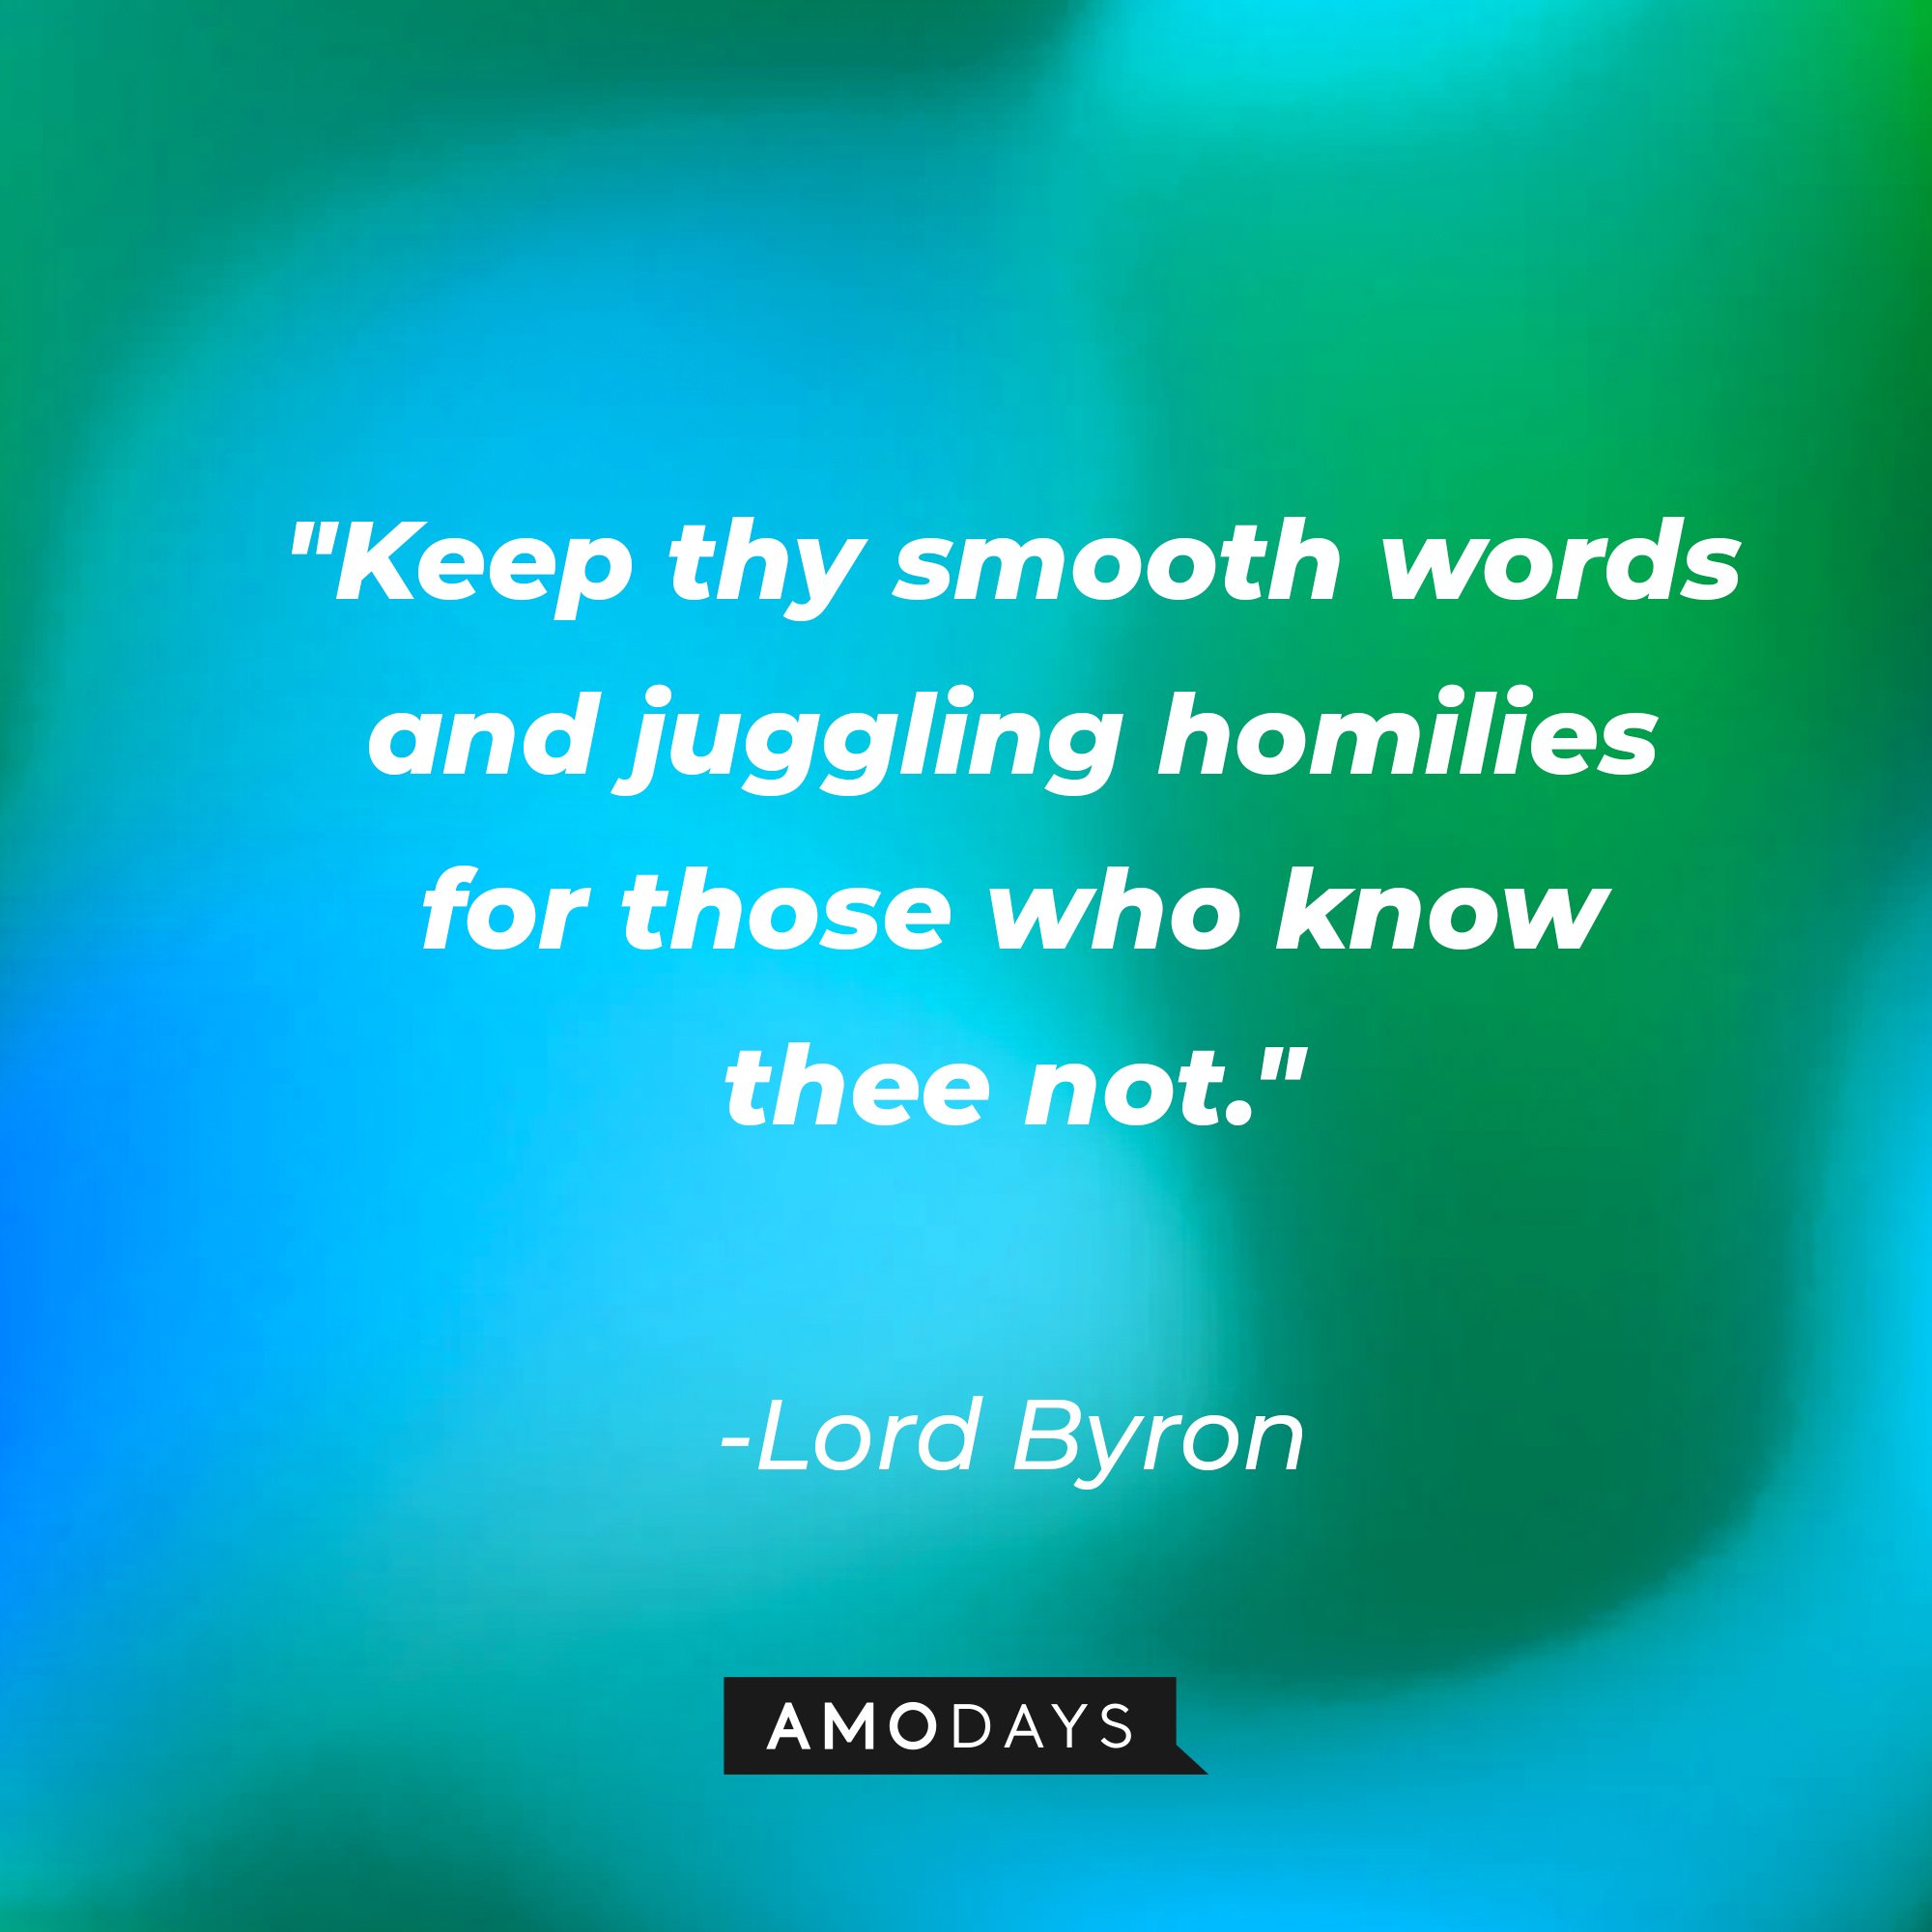 Lord Byron's quote:\\\\\\\\\\\\\\\\u00a0"Keep thy smooth words and juggling homilies for those who know thee not."\\\\\\\\\\\\\\\\u00a0| Image: AmoDays